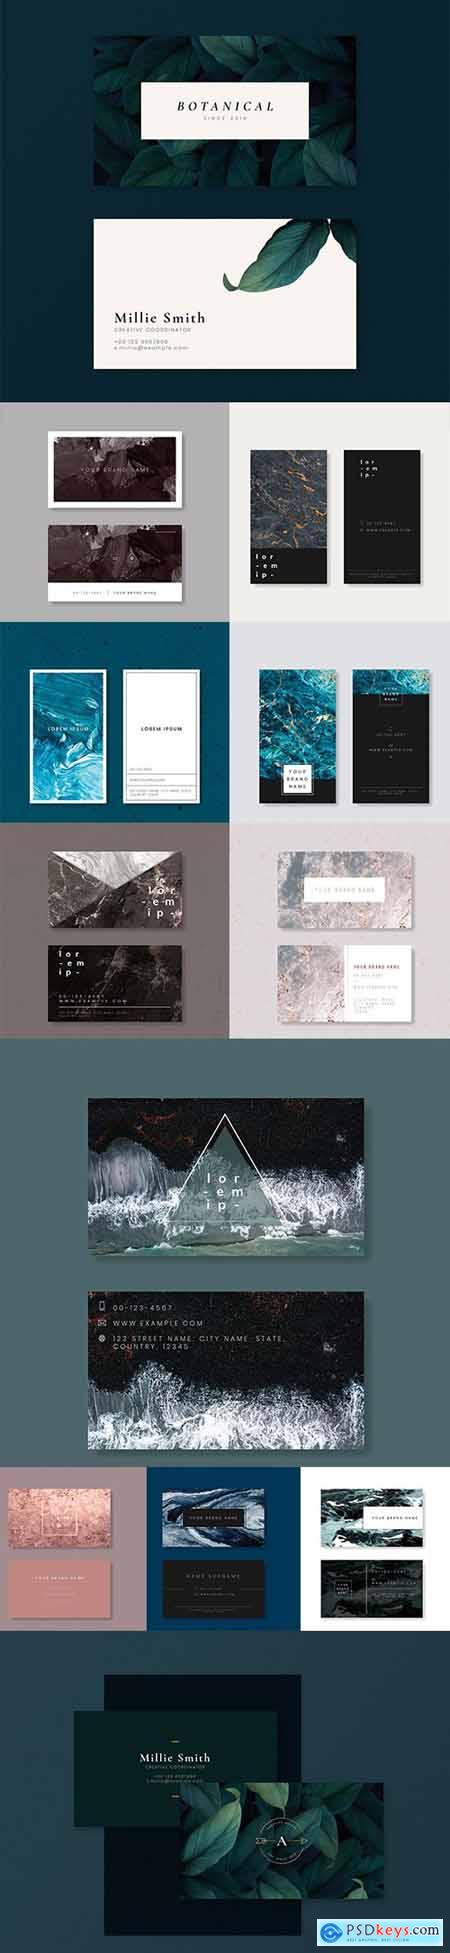 Set of Professional Business Card Templates vol3